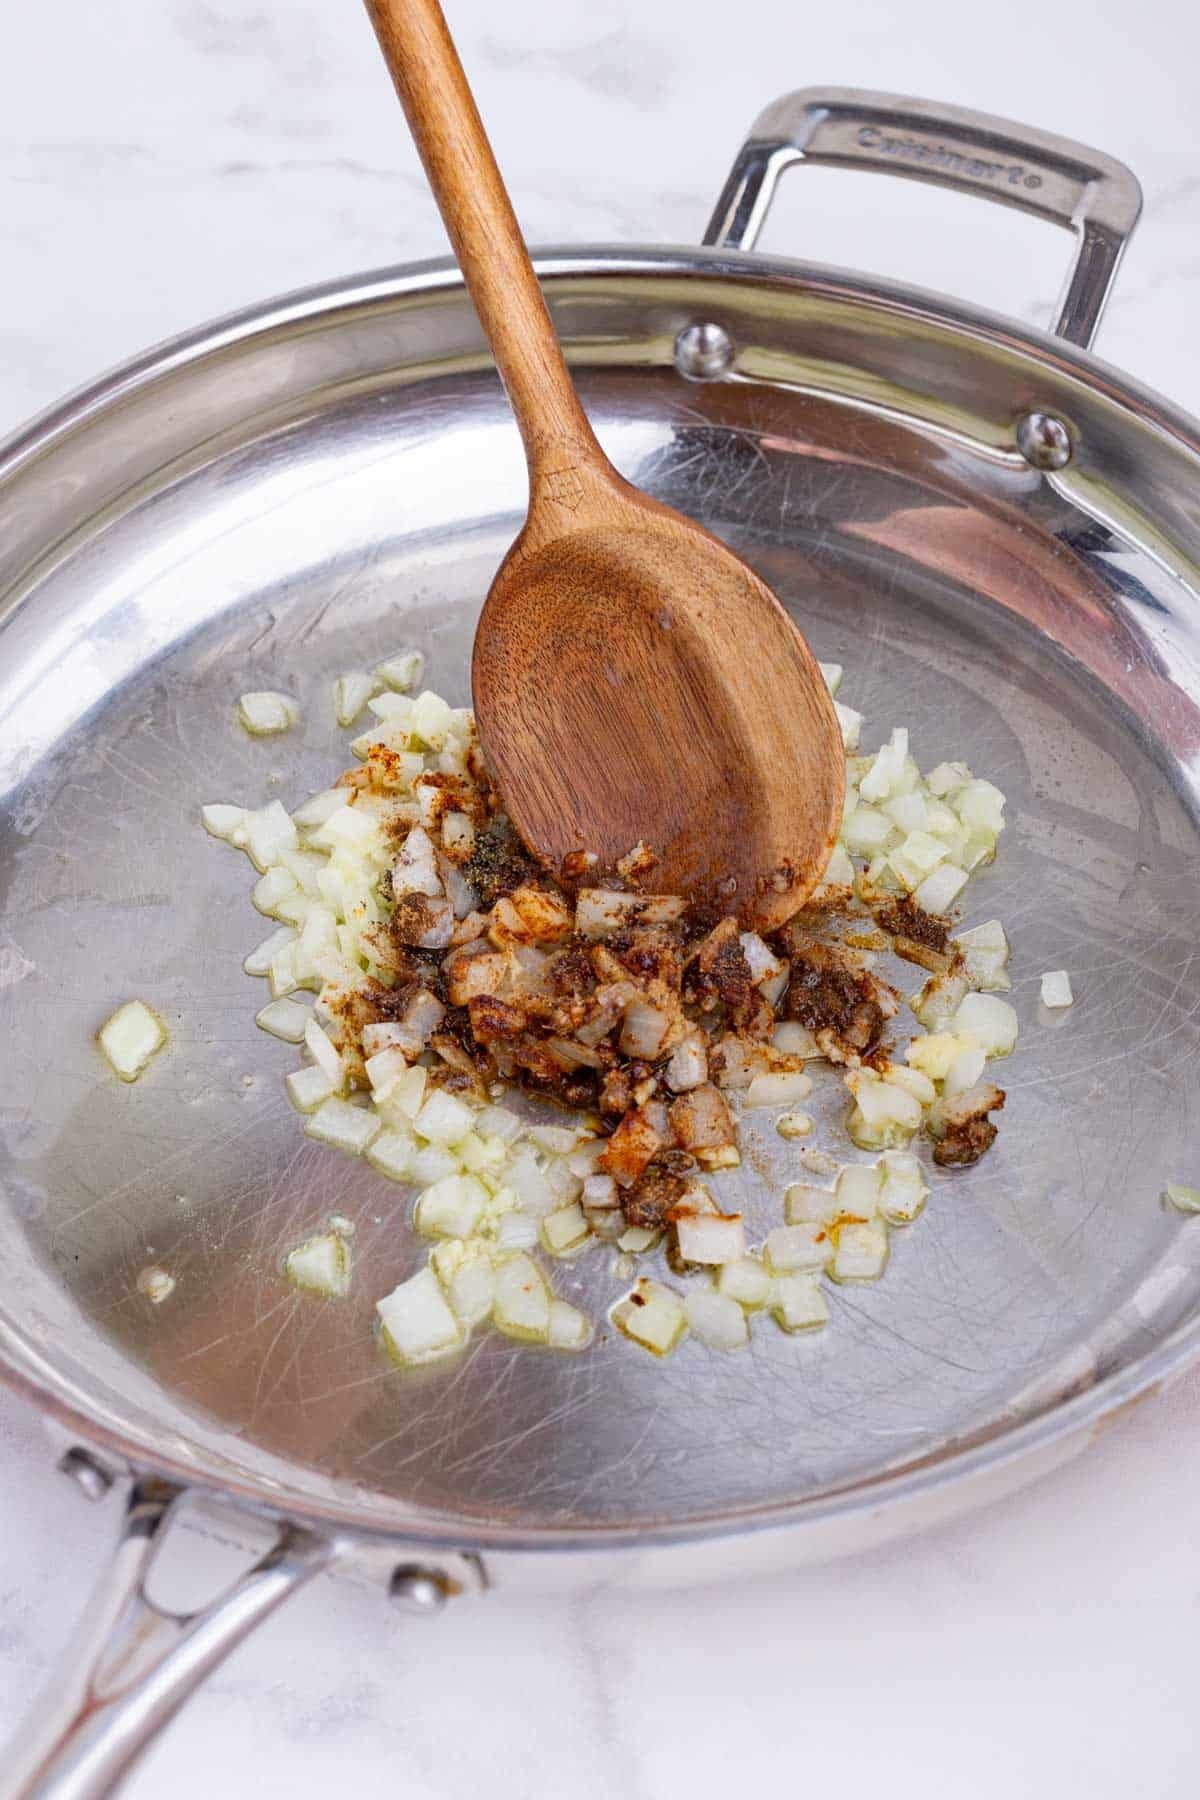 A spoon stirs the onion and seasonings in the skillet.